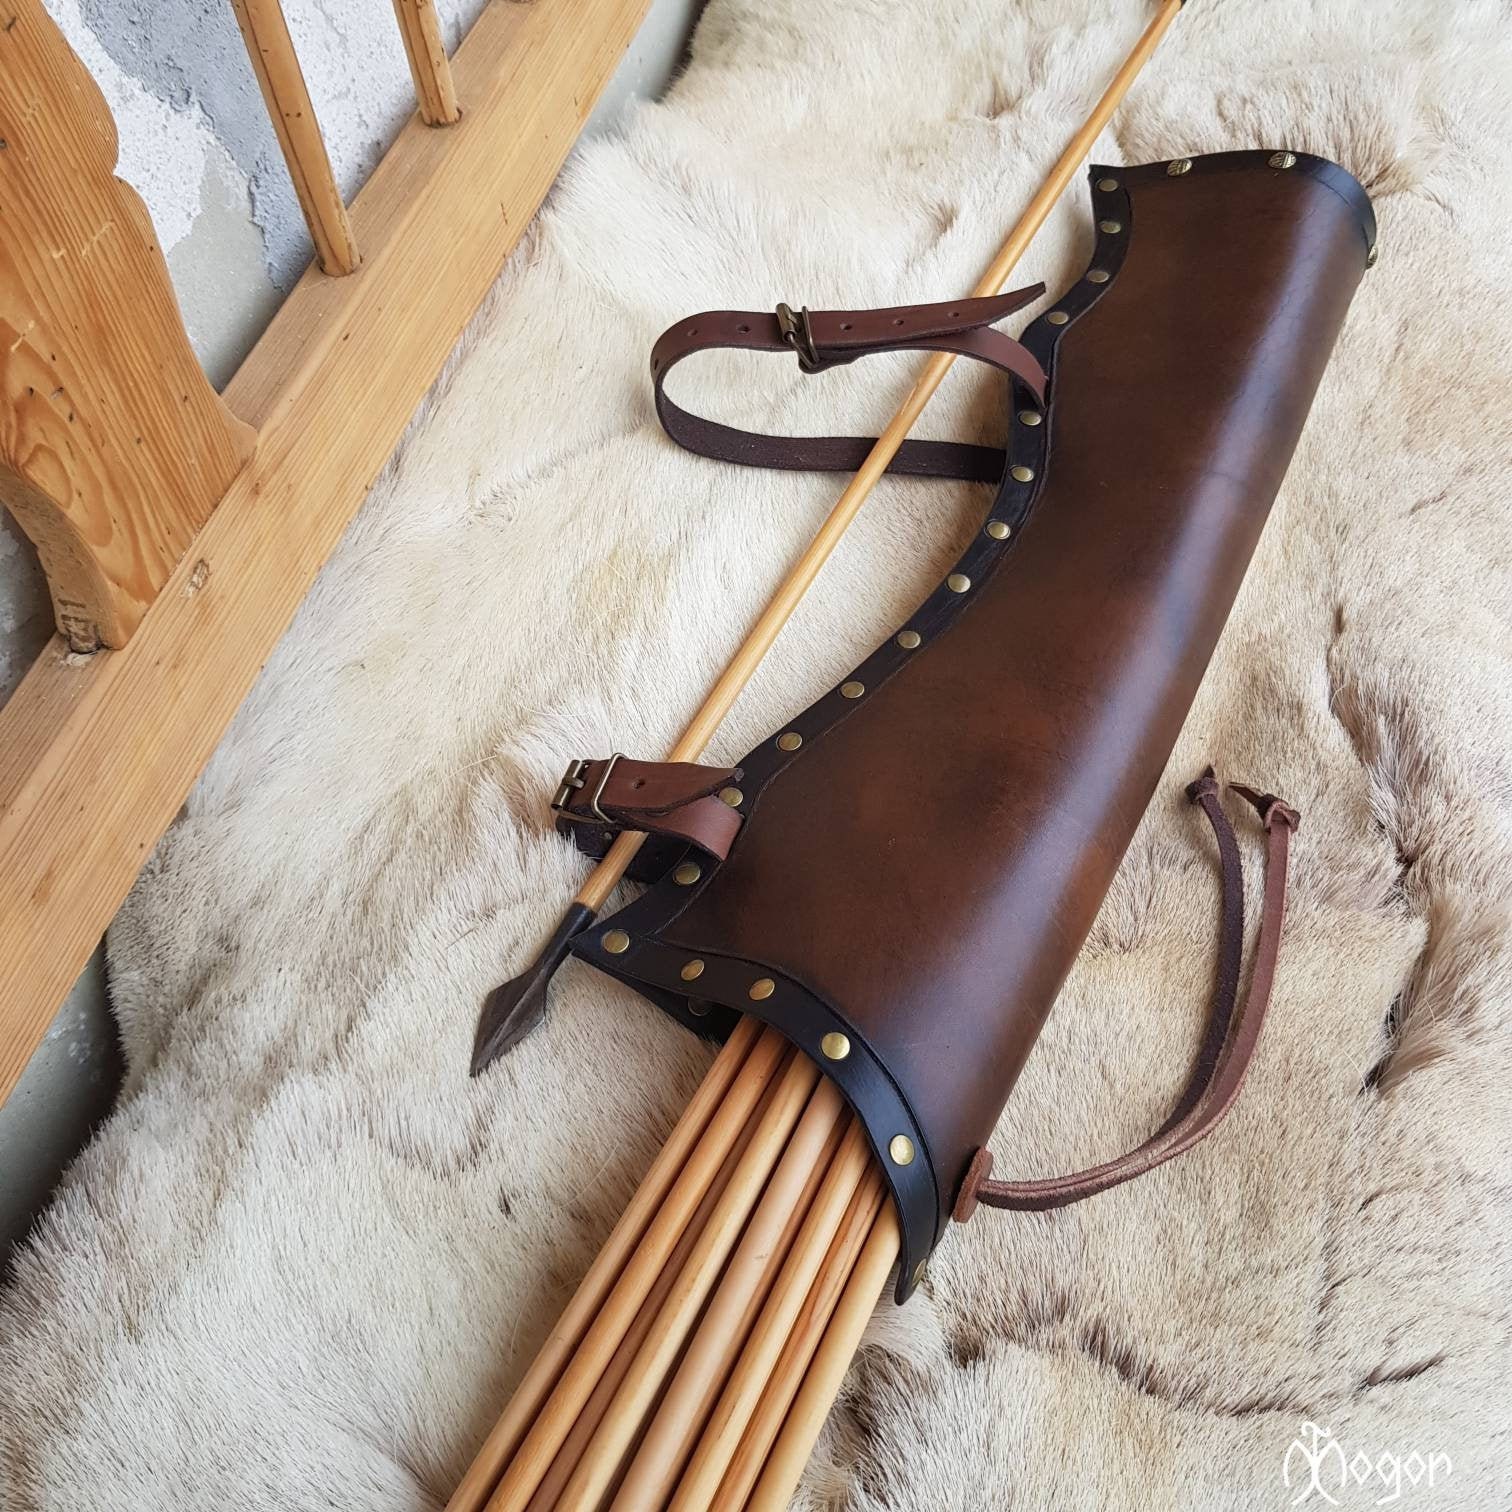 GEGEXIAOWU Medieval Retro Back Quiver Bow Leather Arrow Holder with Large Pouch Handmade Straps Belt Bag 